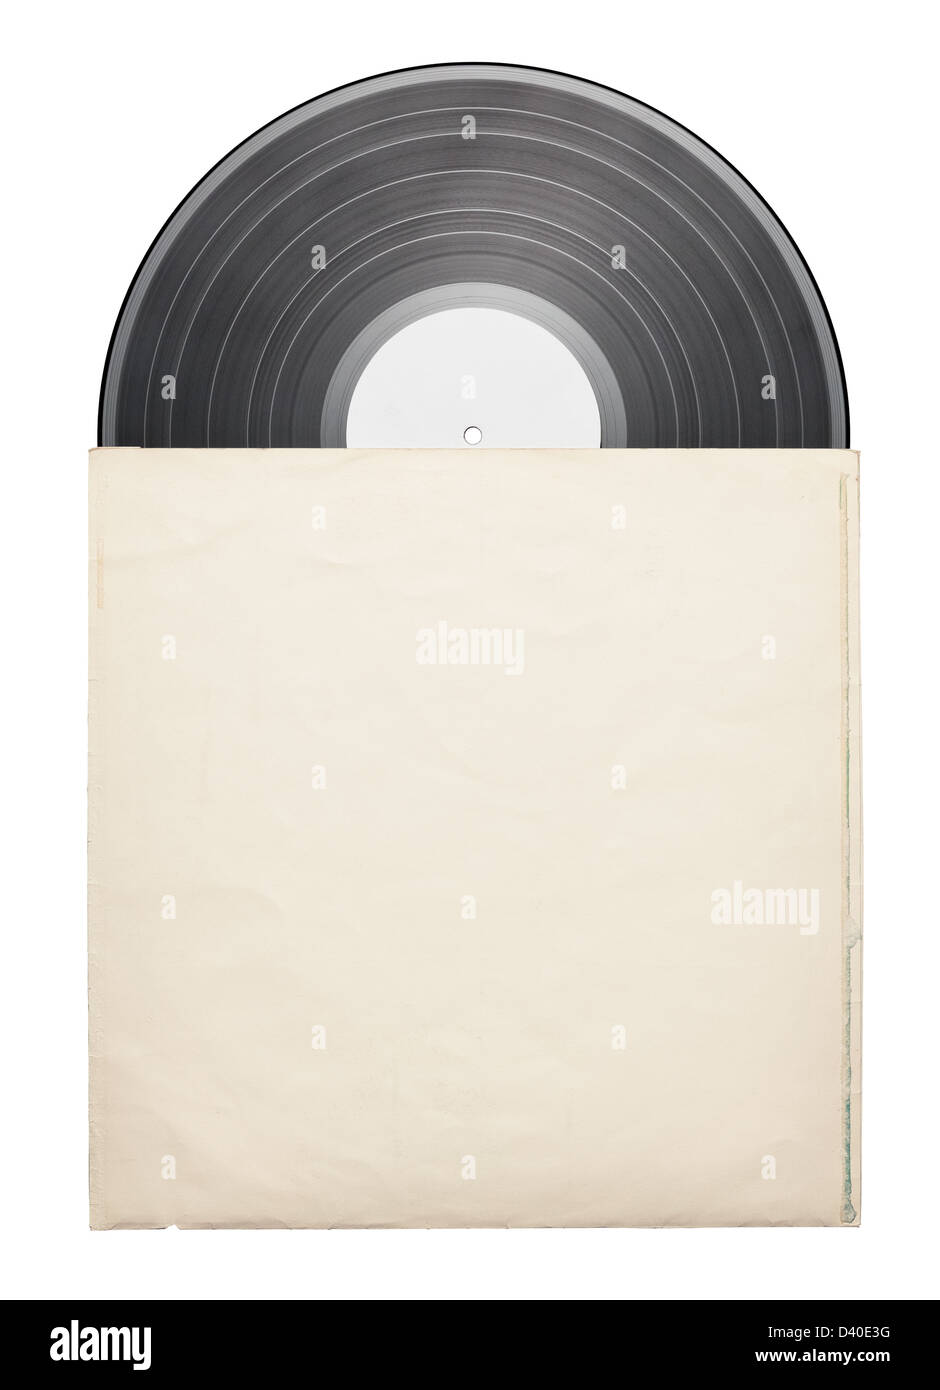 Old vinyl record in a paper case Stock Photo